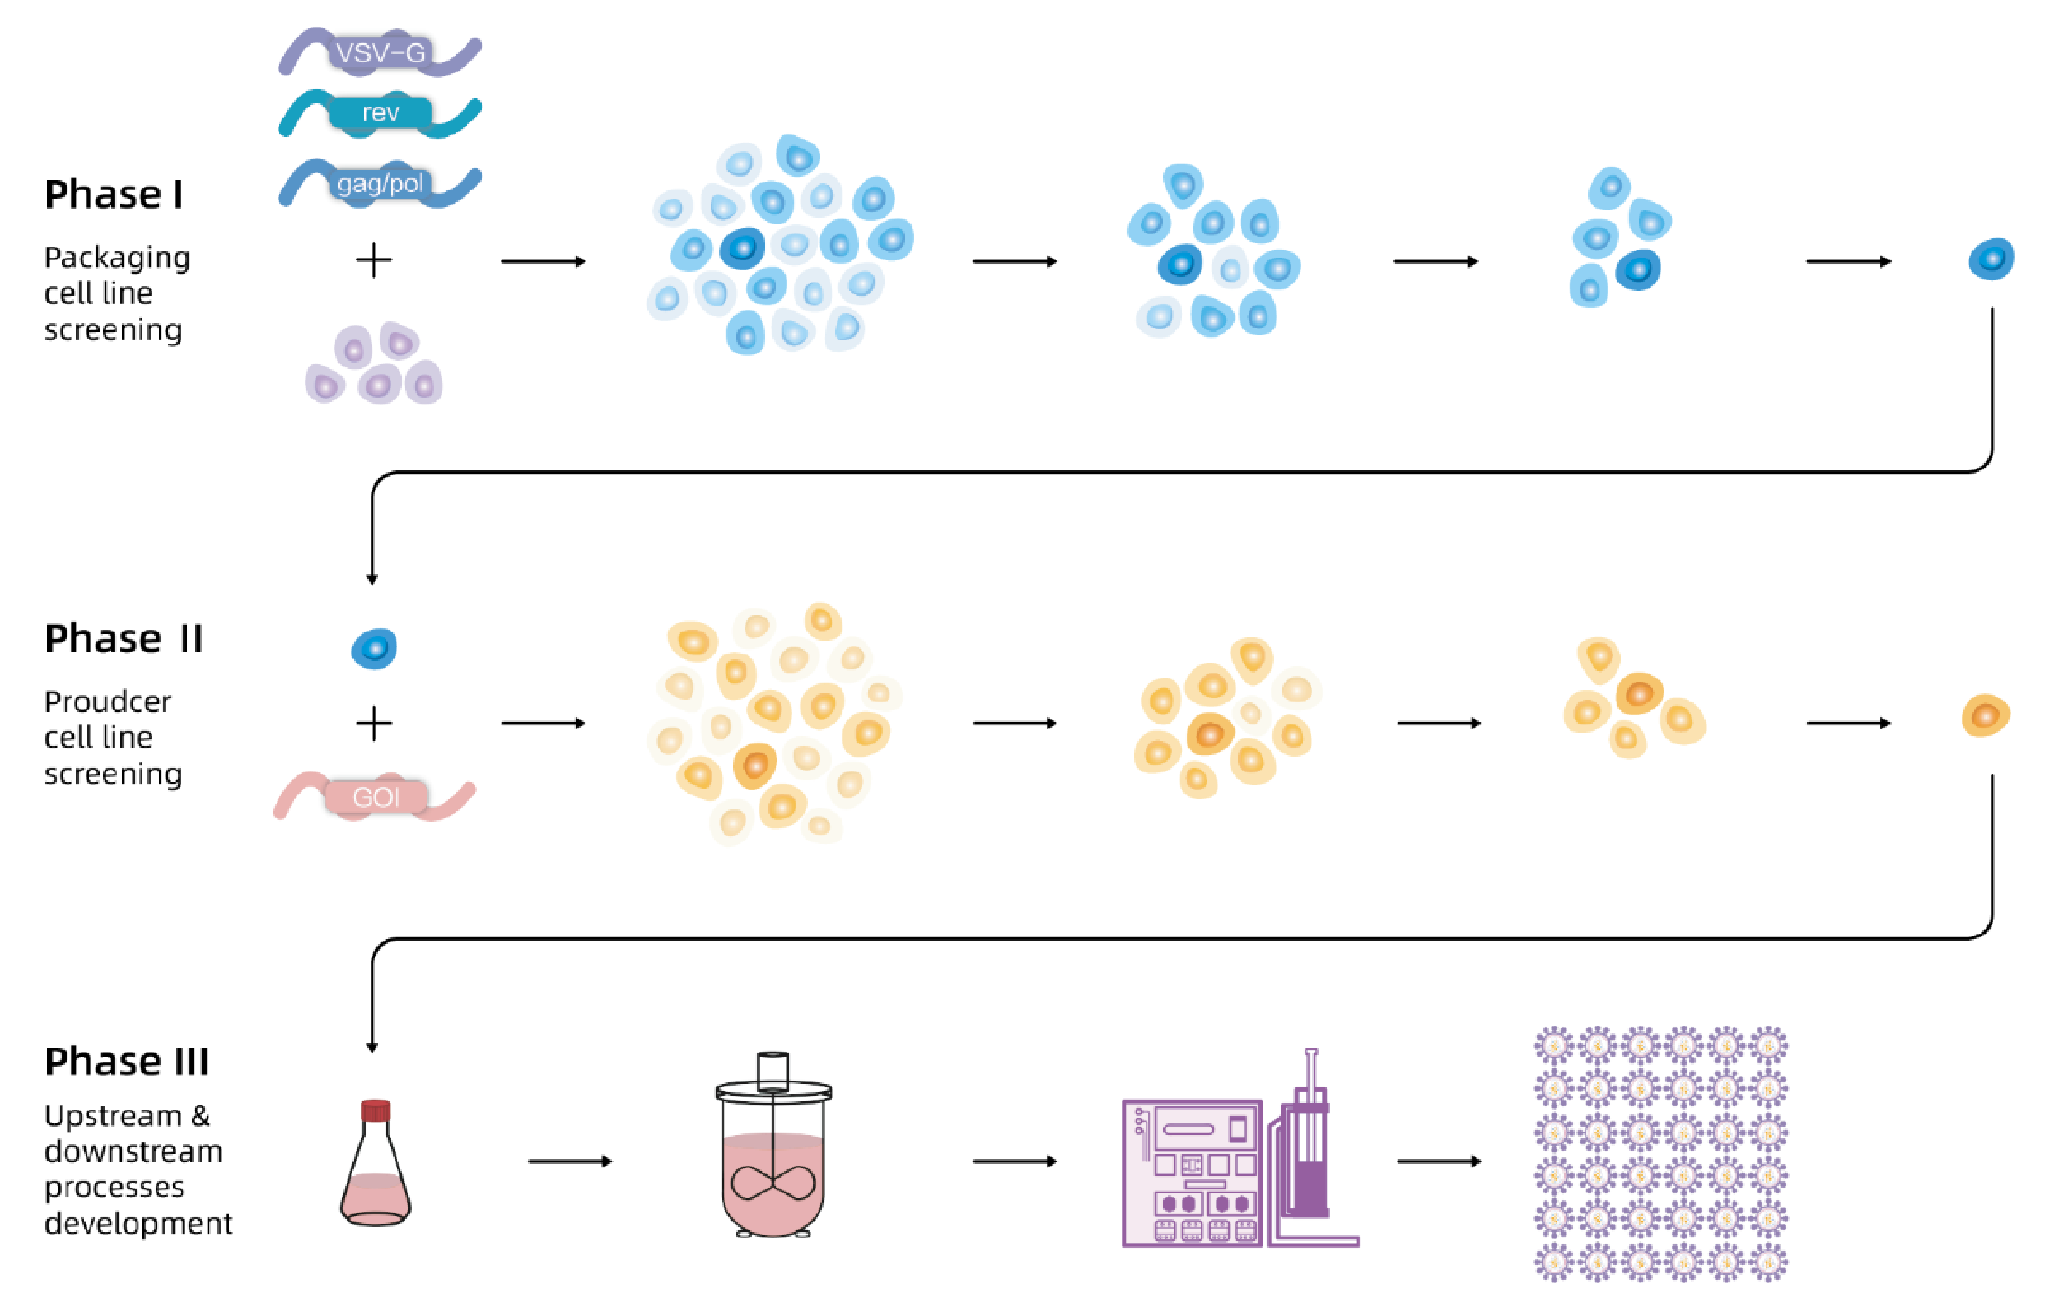 In Phase 2, the producer cell line is developed with GOI stably inserted. In Phase 3, all upstream and downstream processes based on stable producer cell lines are developed.